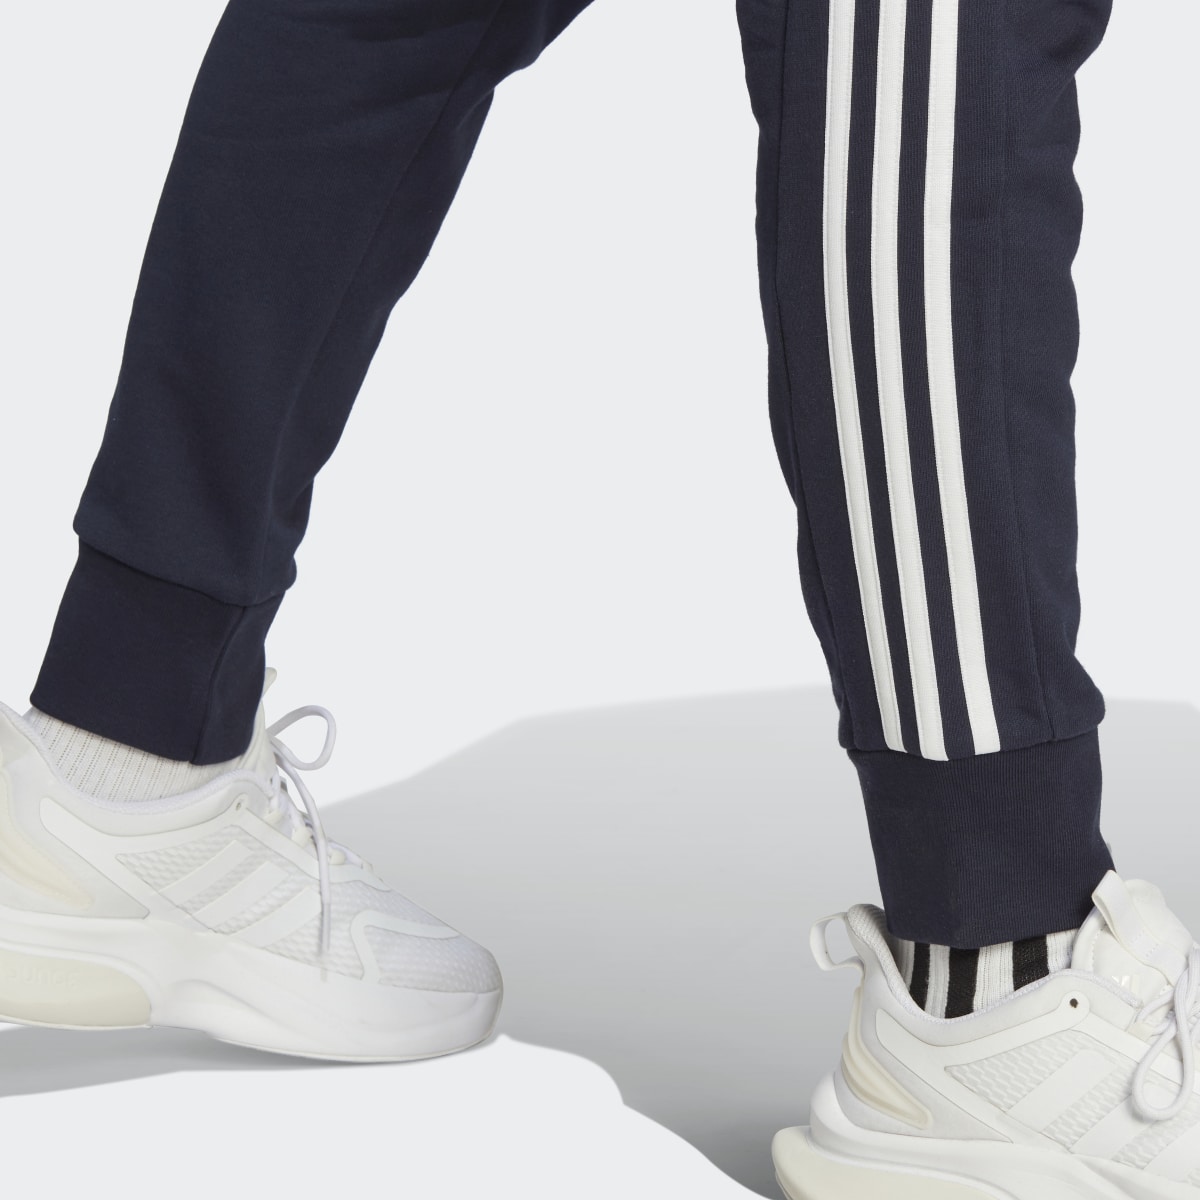 Adidas Essentials French Terry Tapered Cuff 3-Stripes Joggers. 6